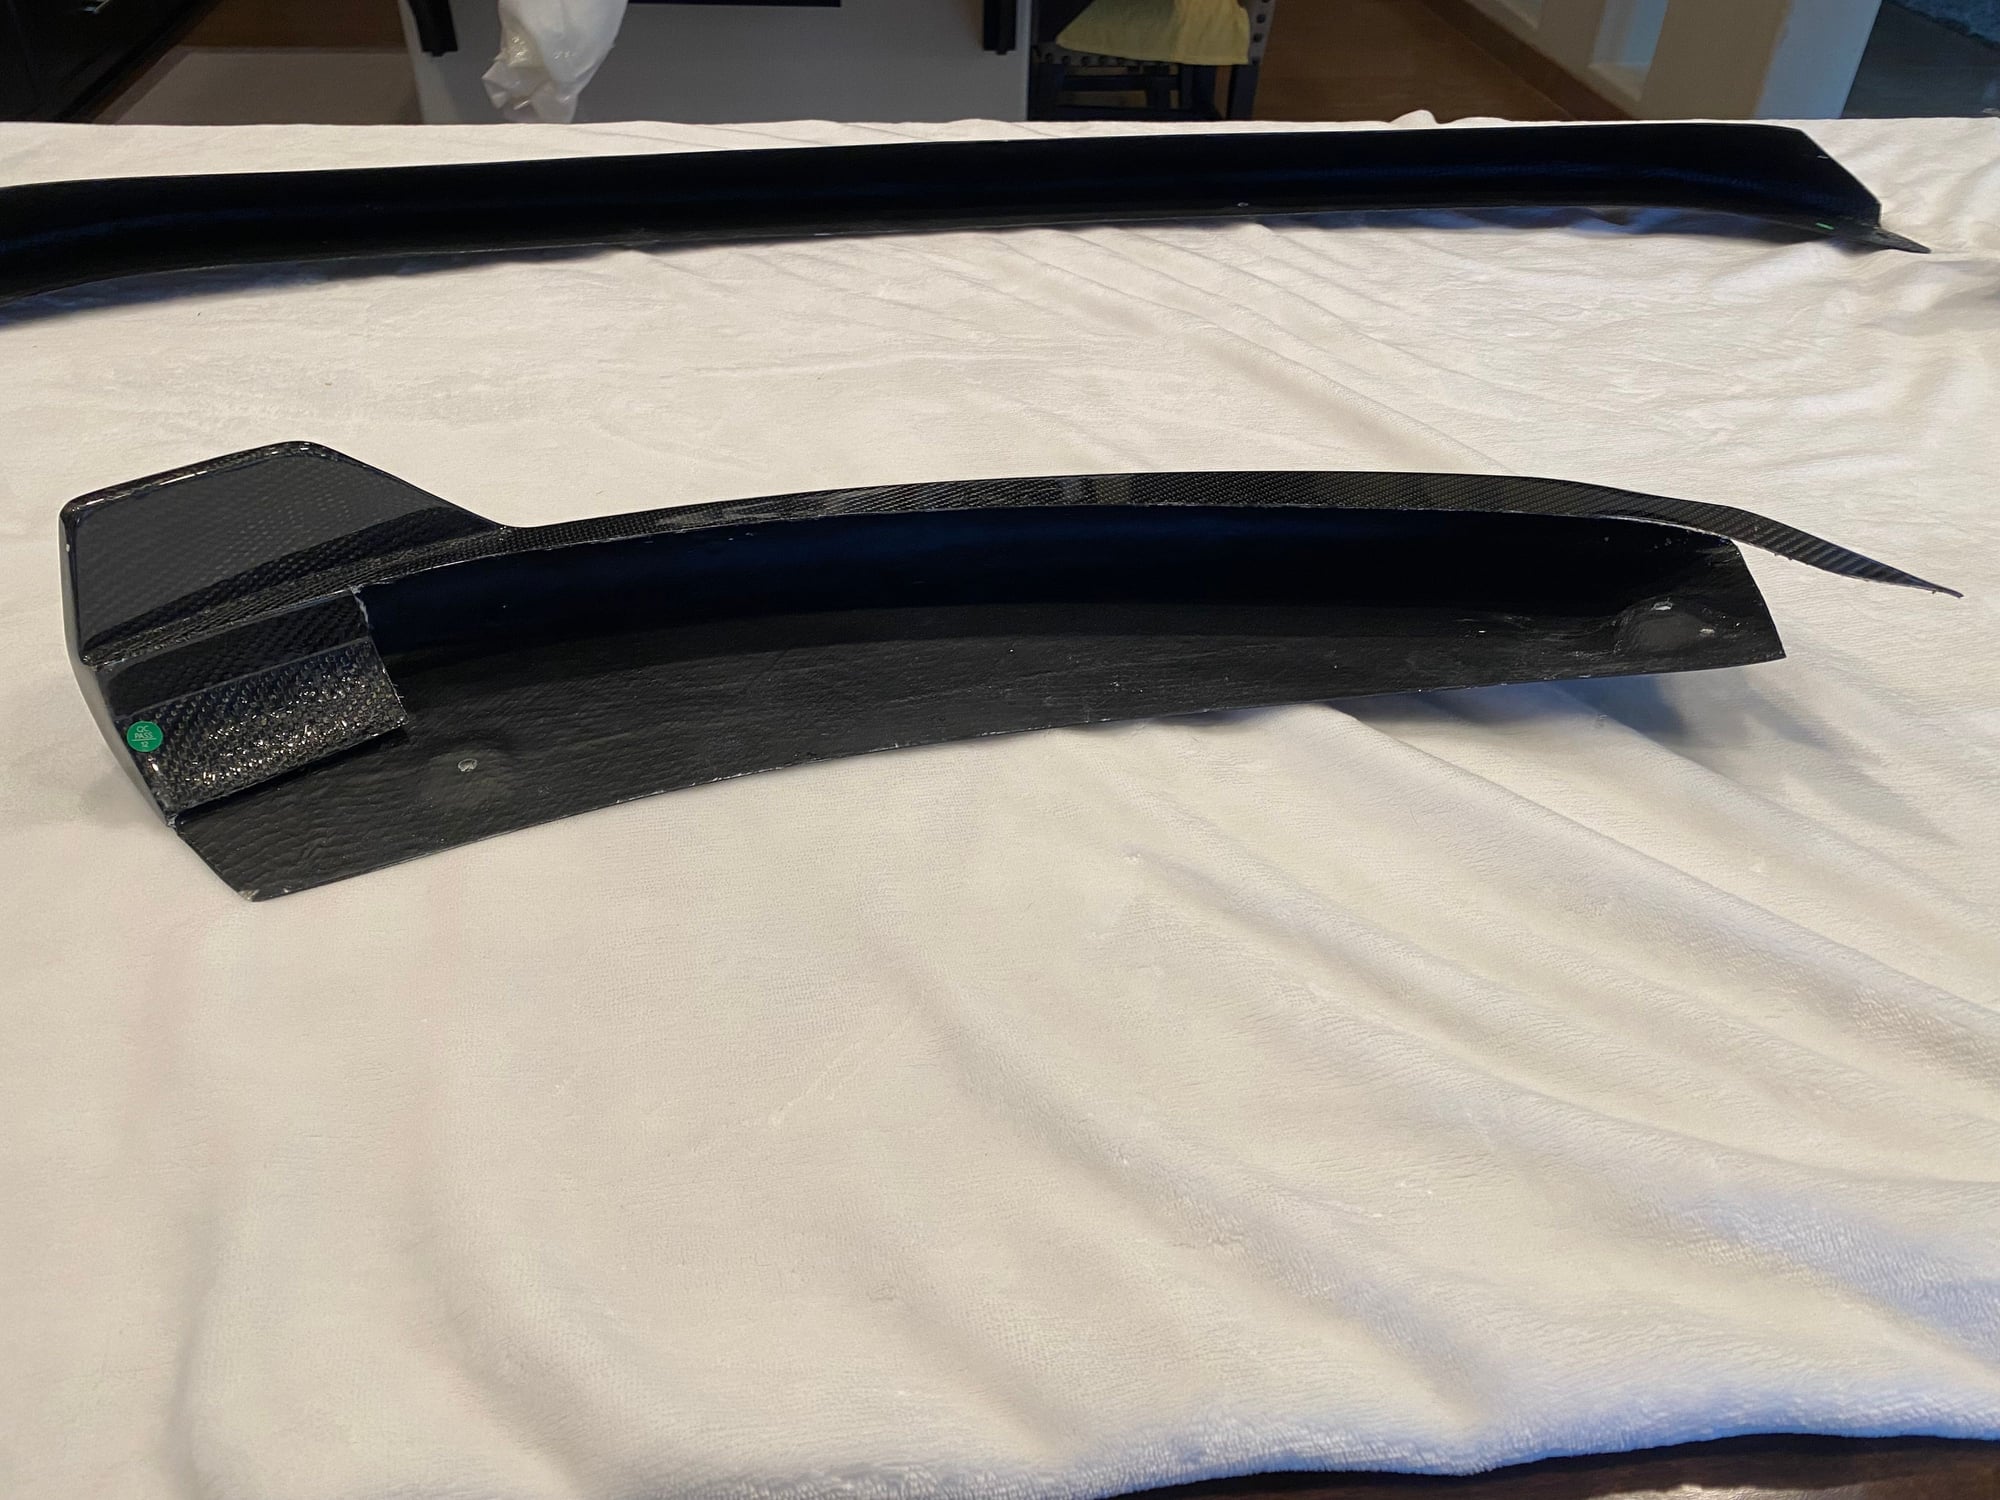 Exterior Body Parts - FS- Carbon Fiber front spoiler C217 S400 S500 S550 Sport Coupe - New - 2015 to 2017 Mercedes-Benz S550 - San Diego, CA 92009, United States